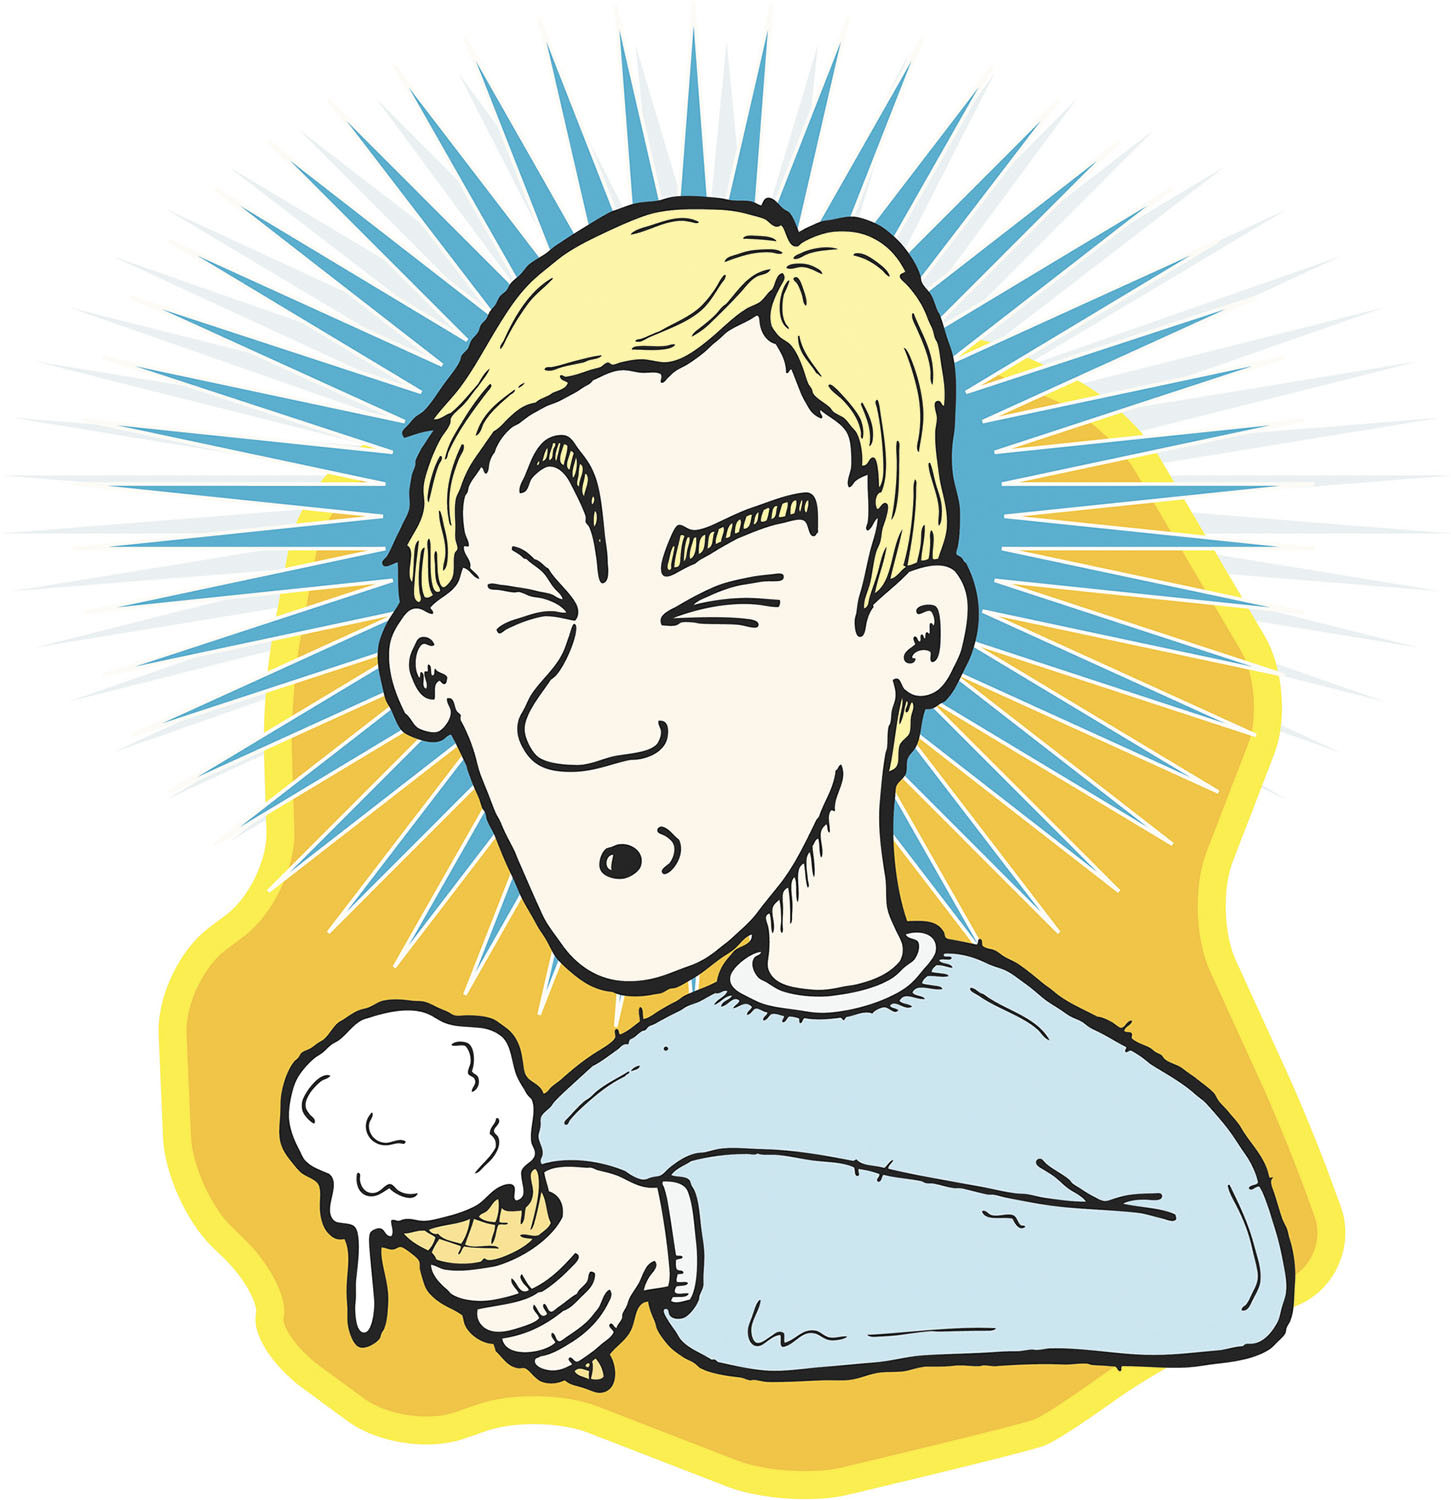 cartoon illustration of a man holding an ice cream cone and squinting as he experiences an ice cream headache